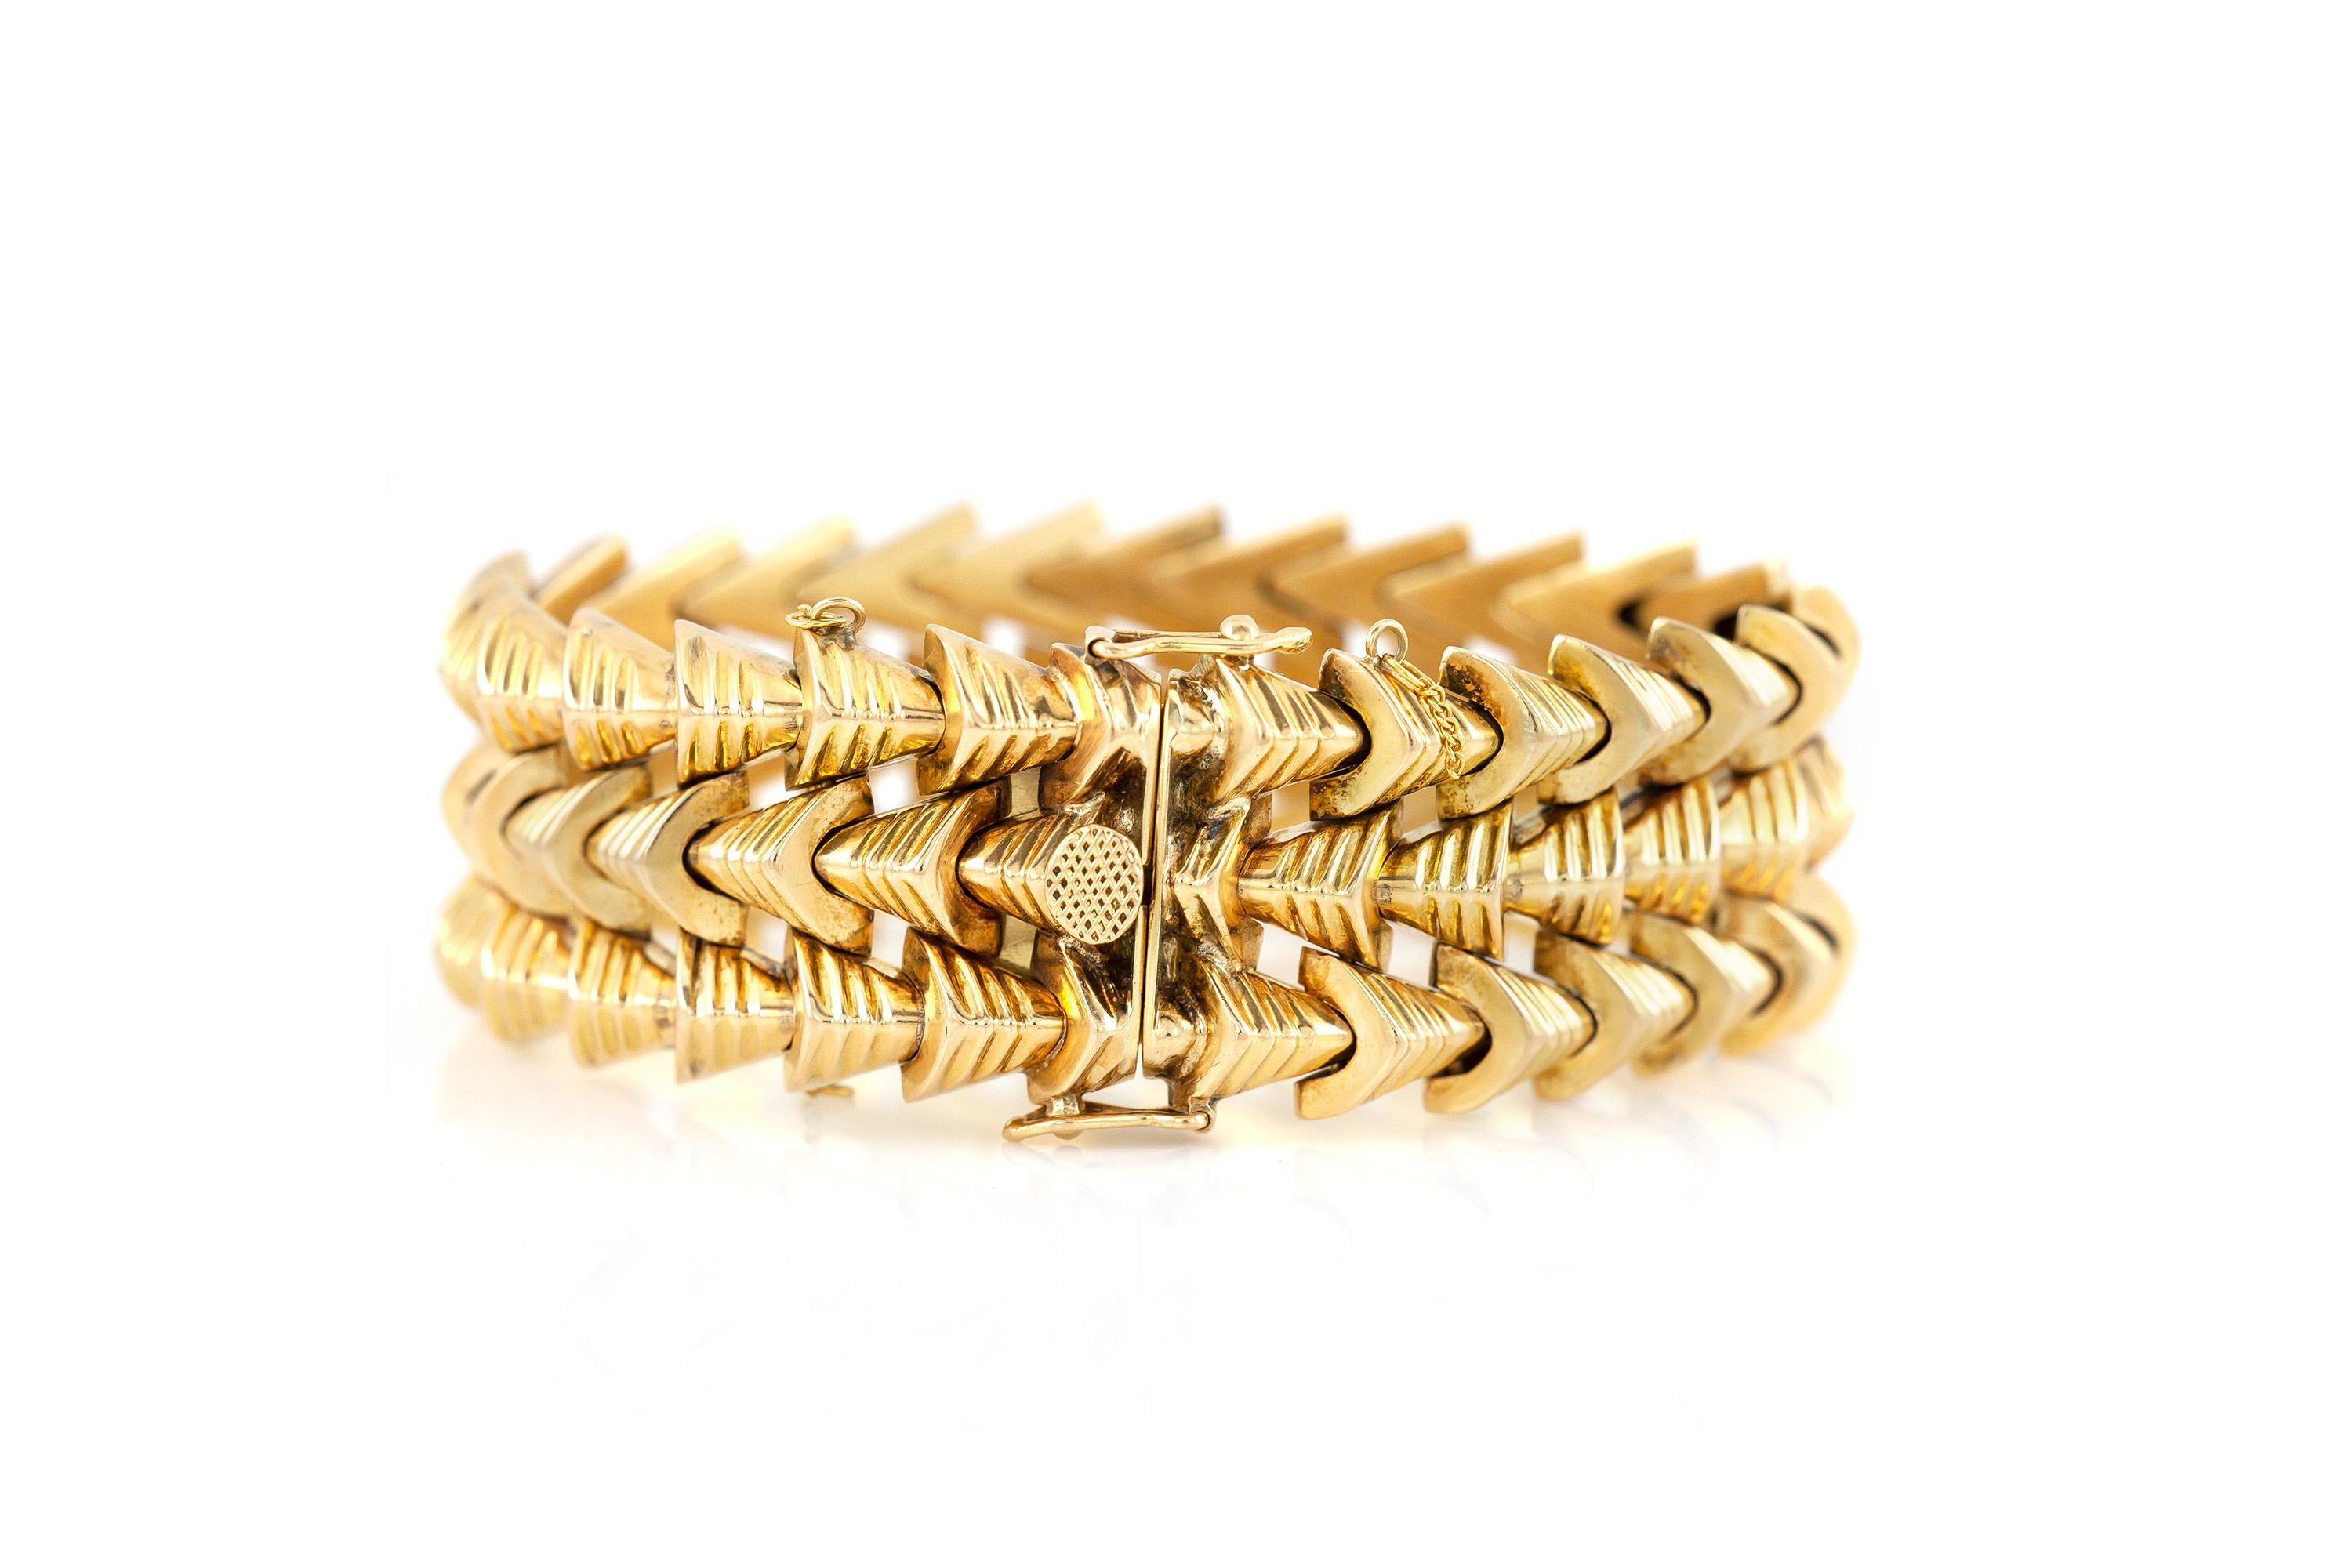 The bracelet is finely crafted in 18k yellow gold, weighing 44.7 dwt, 8 inches long. Circa 1980.